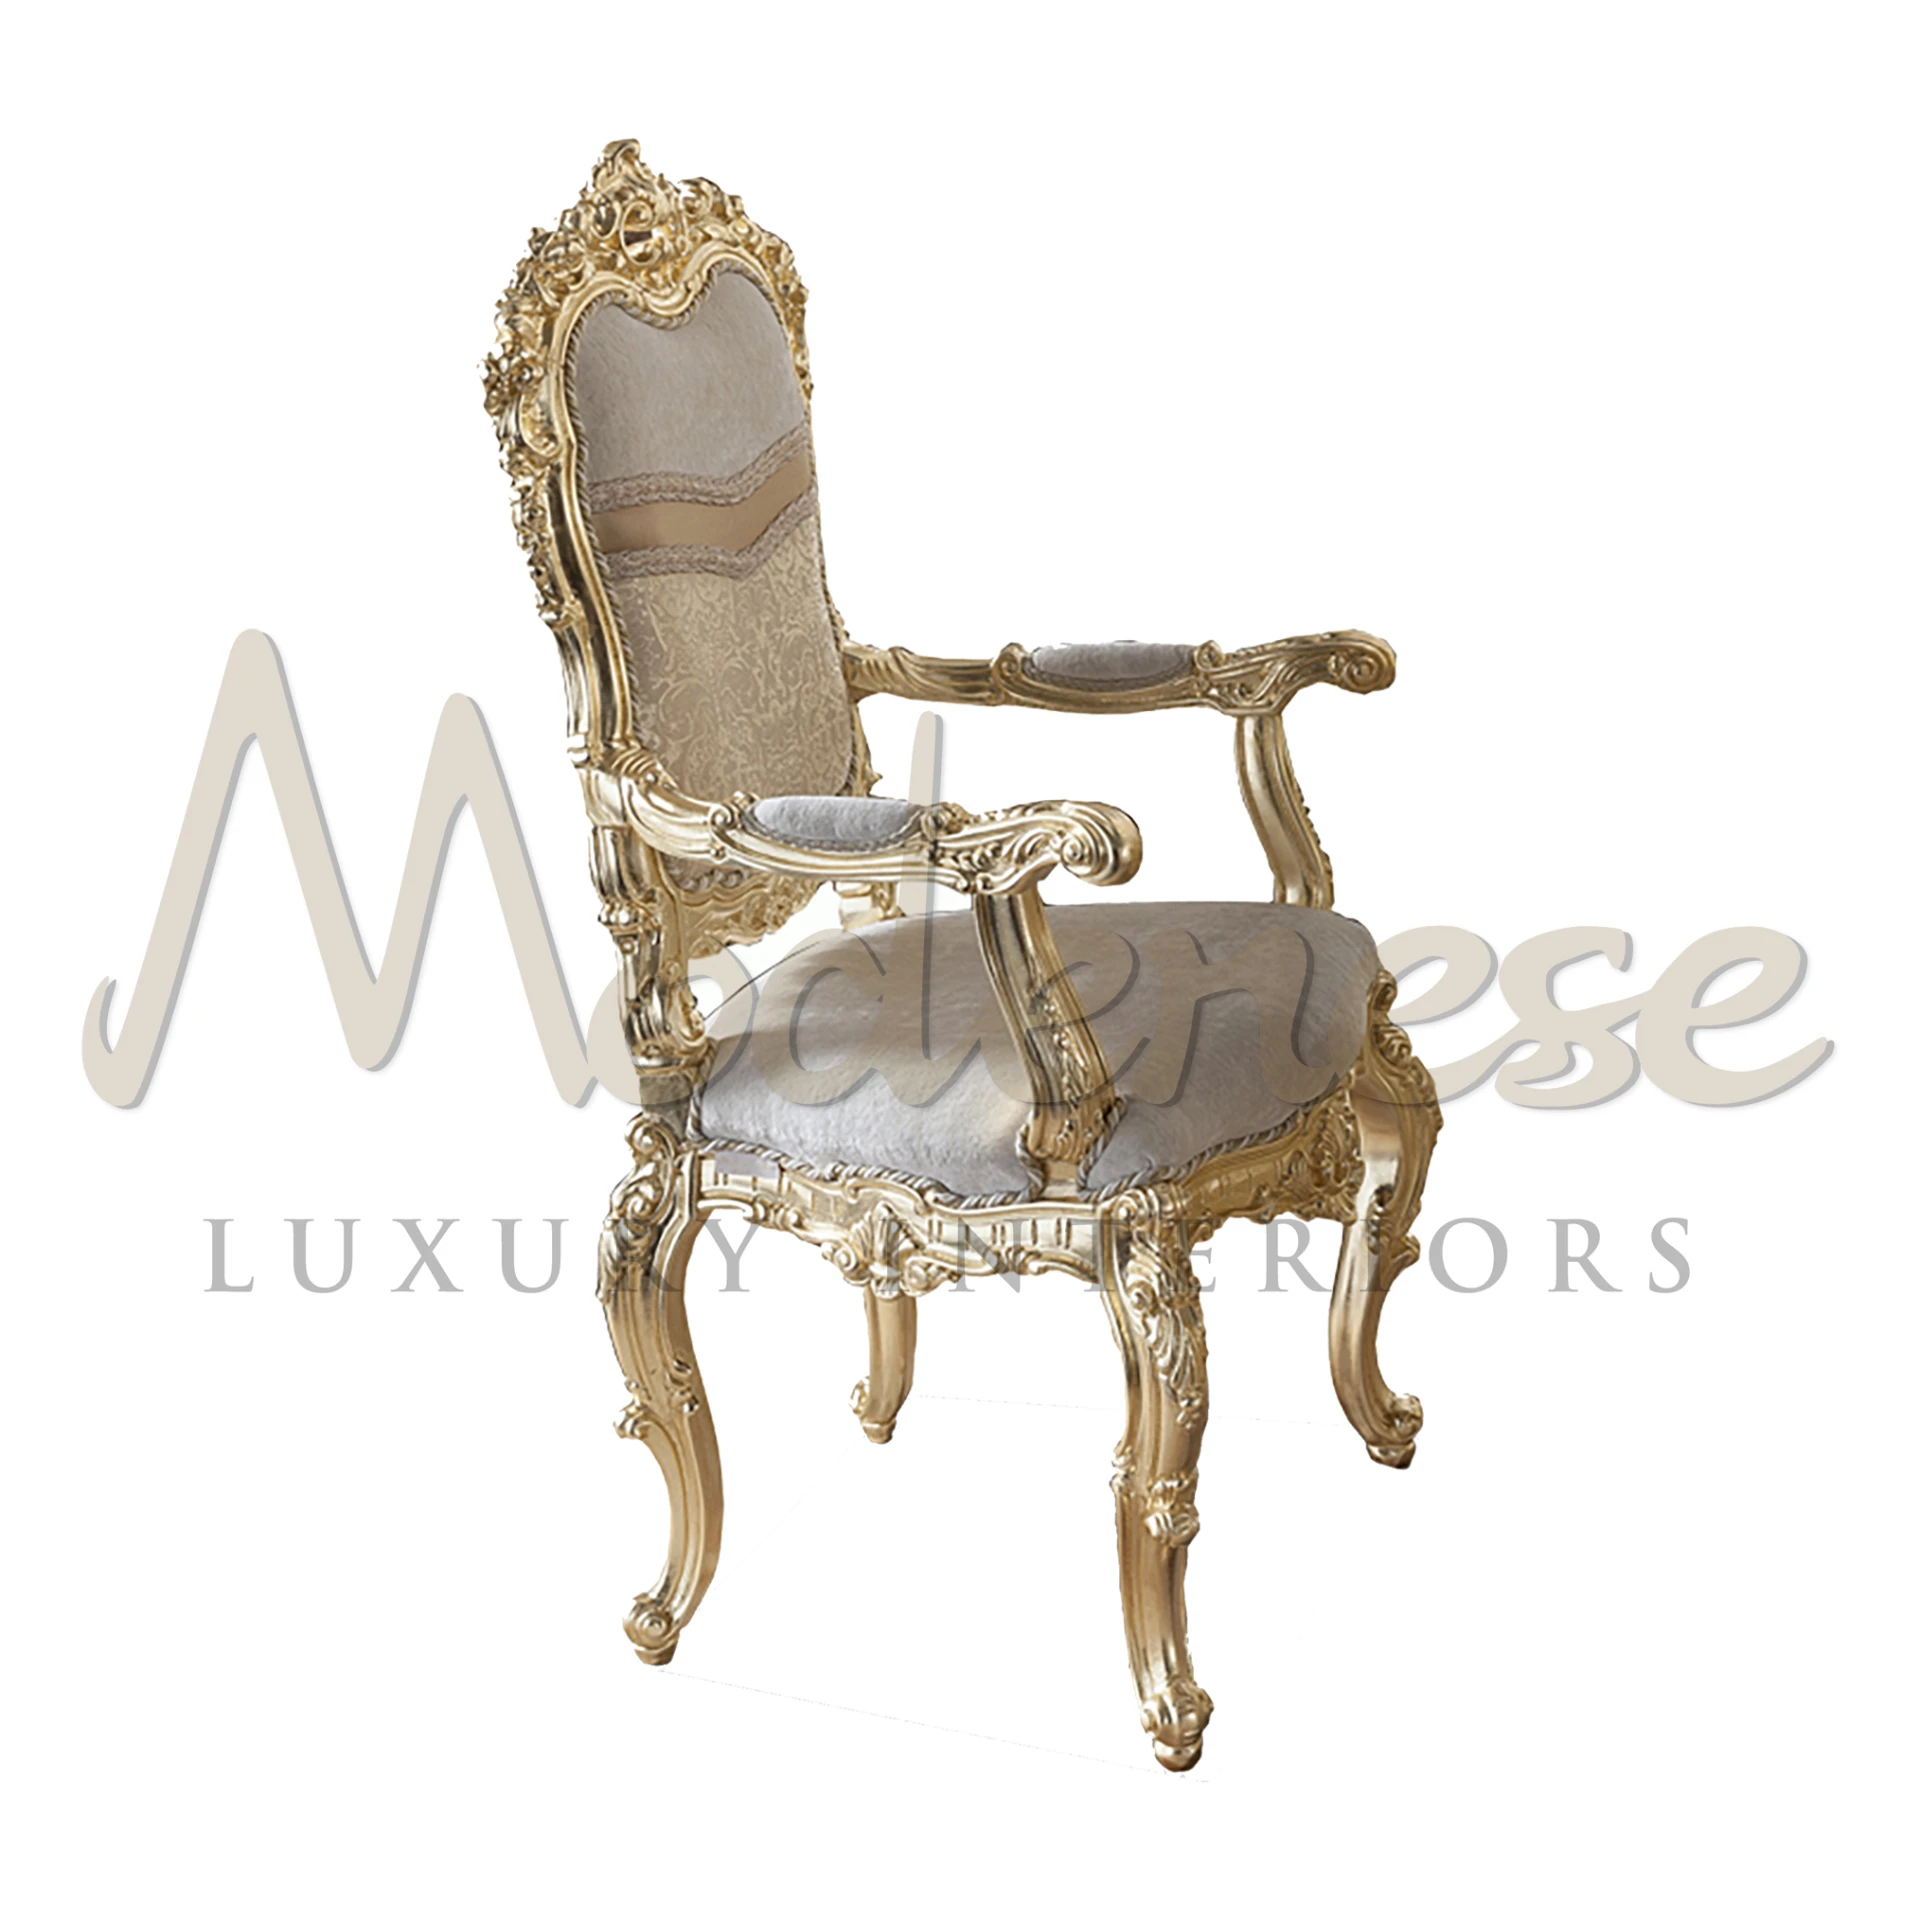 Indulge in luxury with this upholstered chair, adorned in gold leaf finish and intricate baroque carvings by Modenese Furniture.